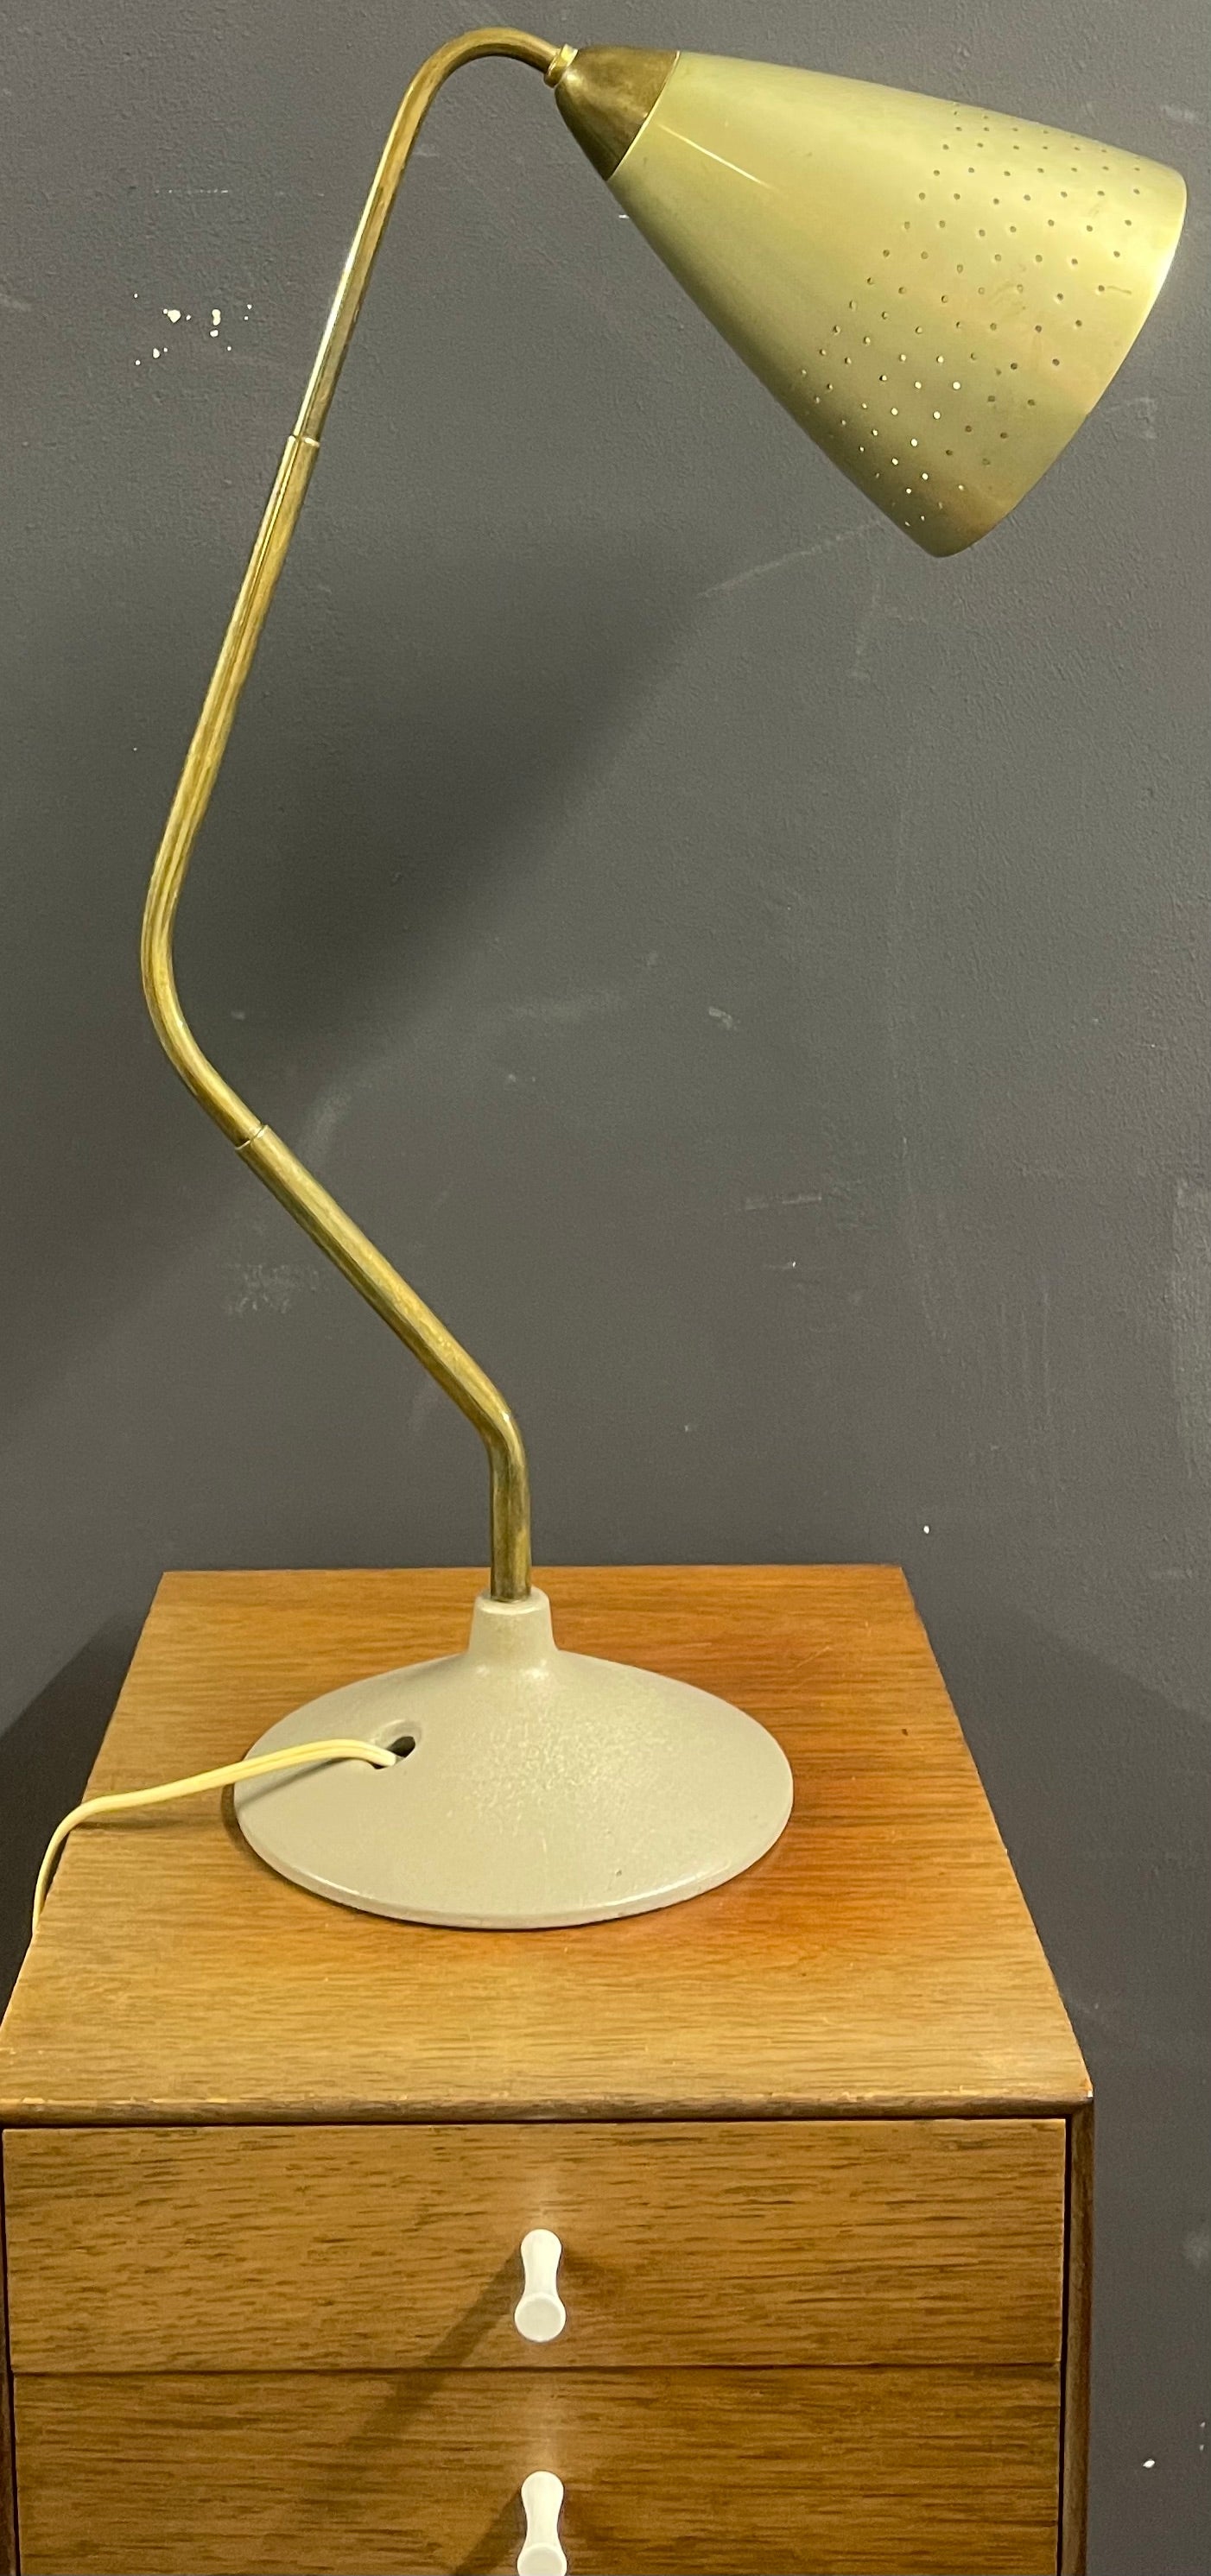 iconic table lamp first presented at the triennale / milano in 1951 . very rare and important piece of modernism in all original and wonderful condition. the system of brass tubes to provide movement in any direction was patented by karl hagenauer